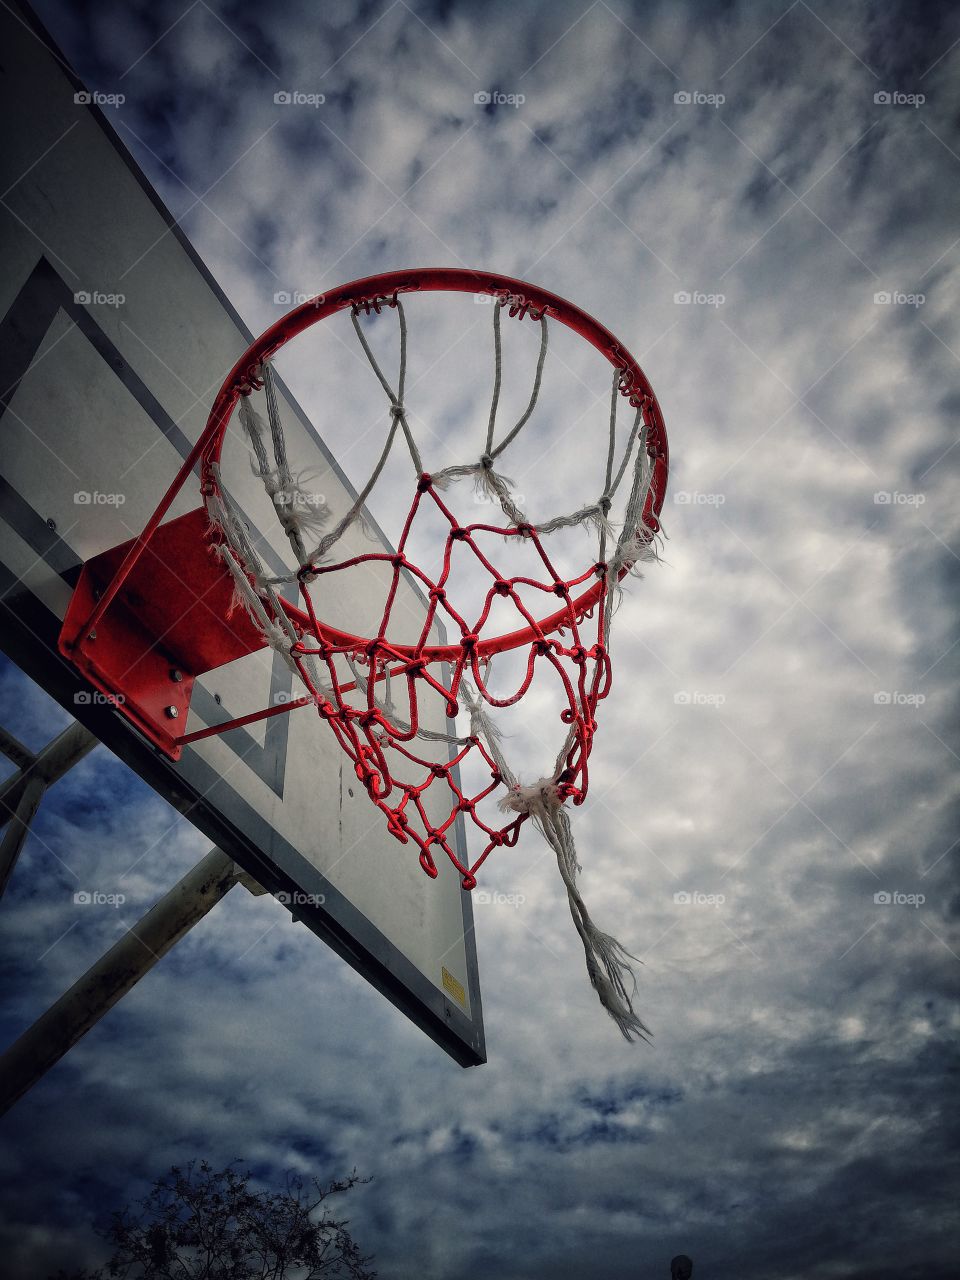 Basketball ball ring in the outdoor field overlooking the beautiful sky